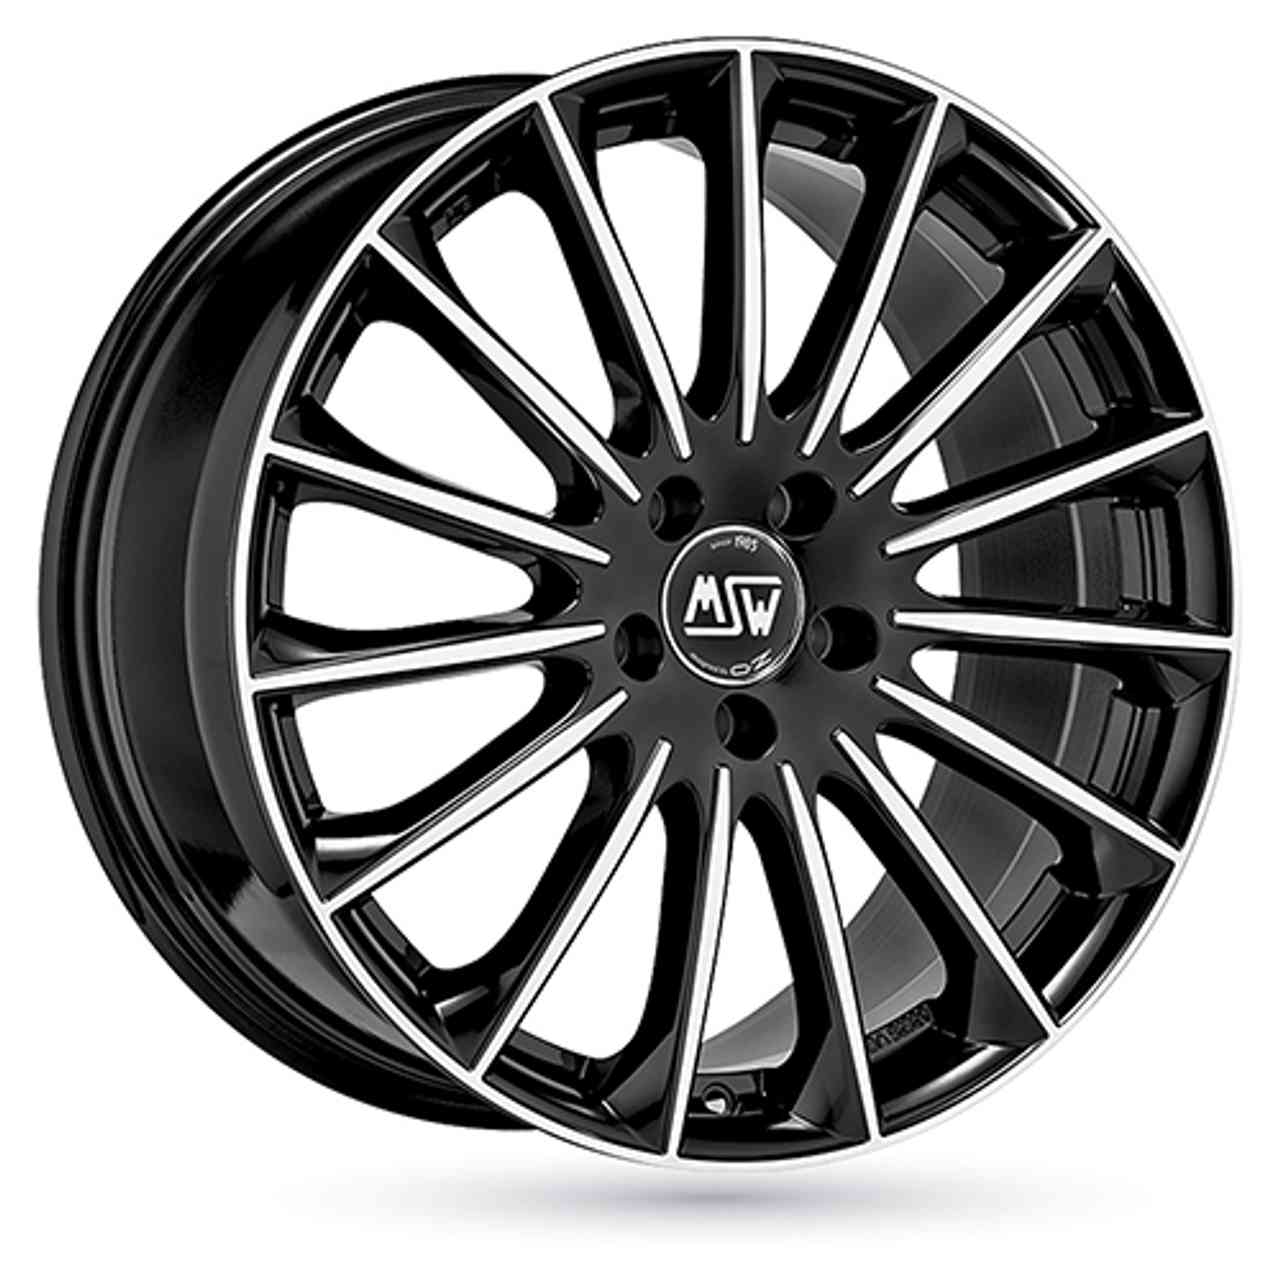 MSW (OZ) MSW 30 gloss black full polished 8.5Jx18 5x114.3 ET40